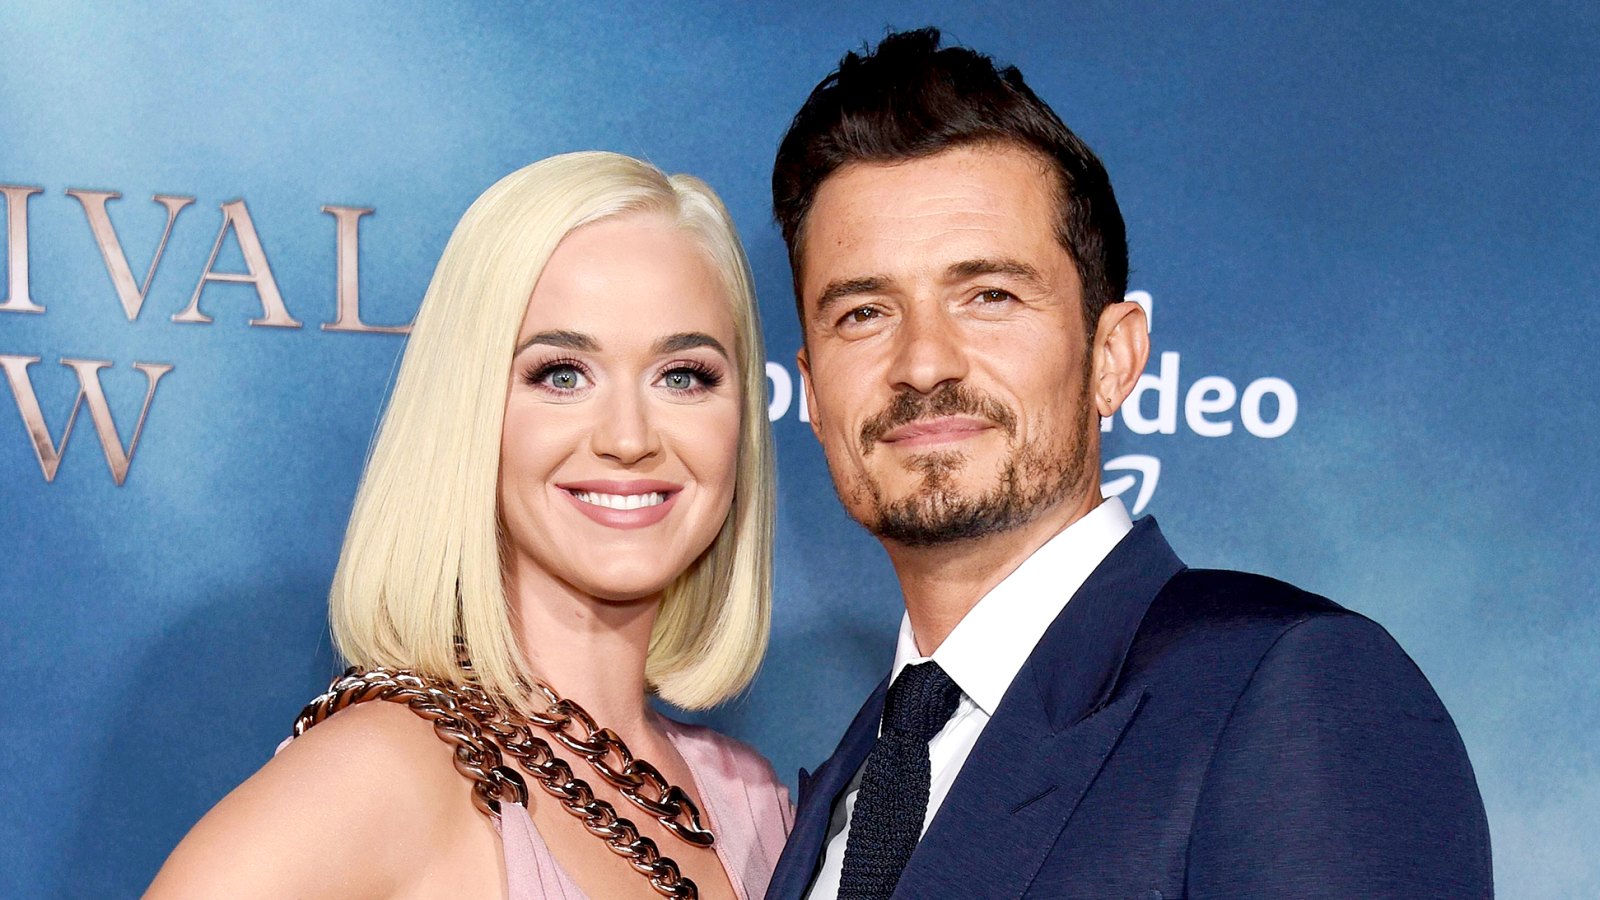 Katy-Perry-and-Orlando-Bloom-Have-FaceTime-Date-With-Their-Dogs